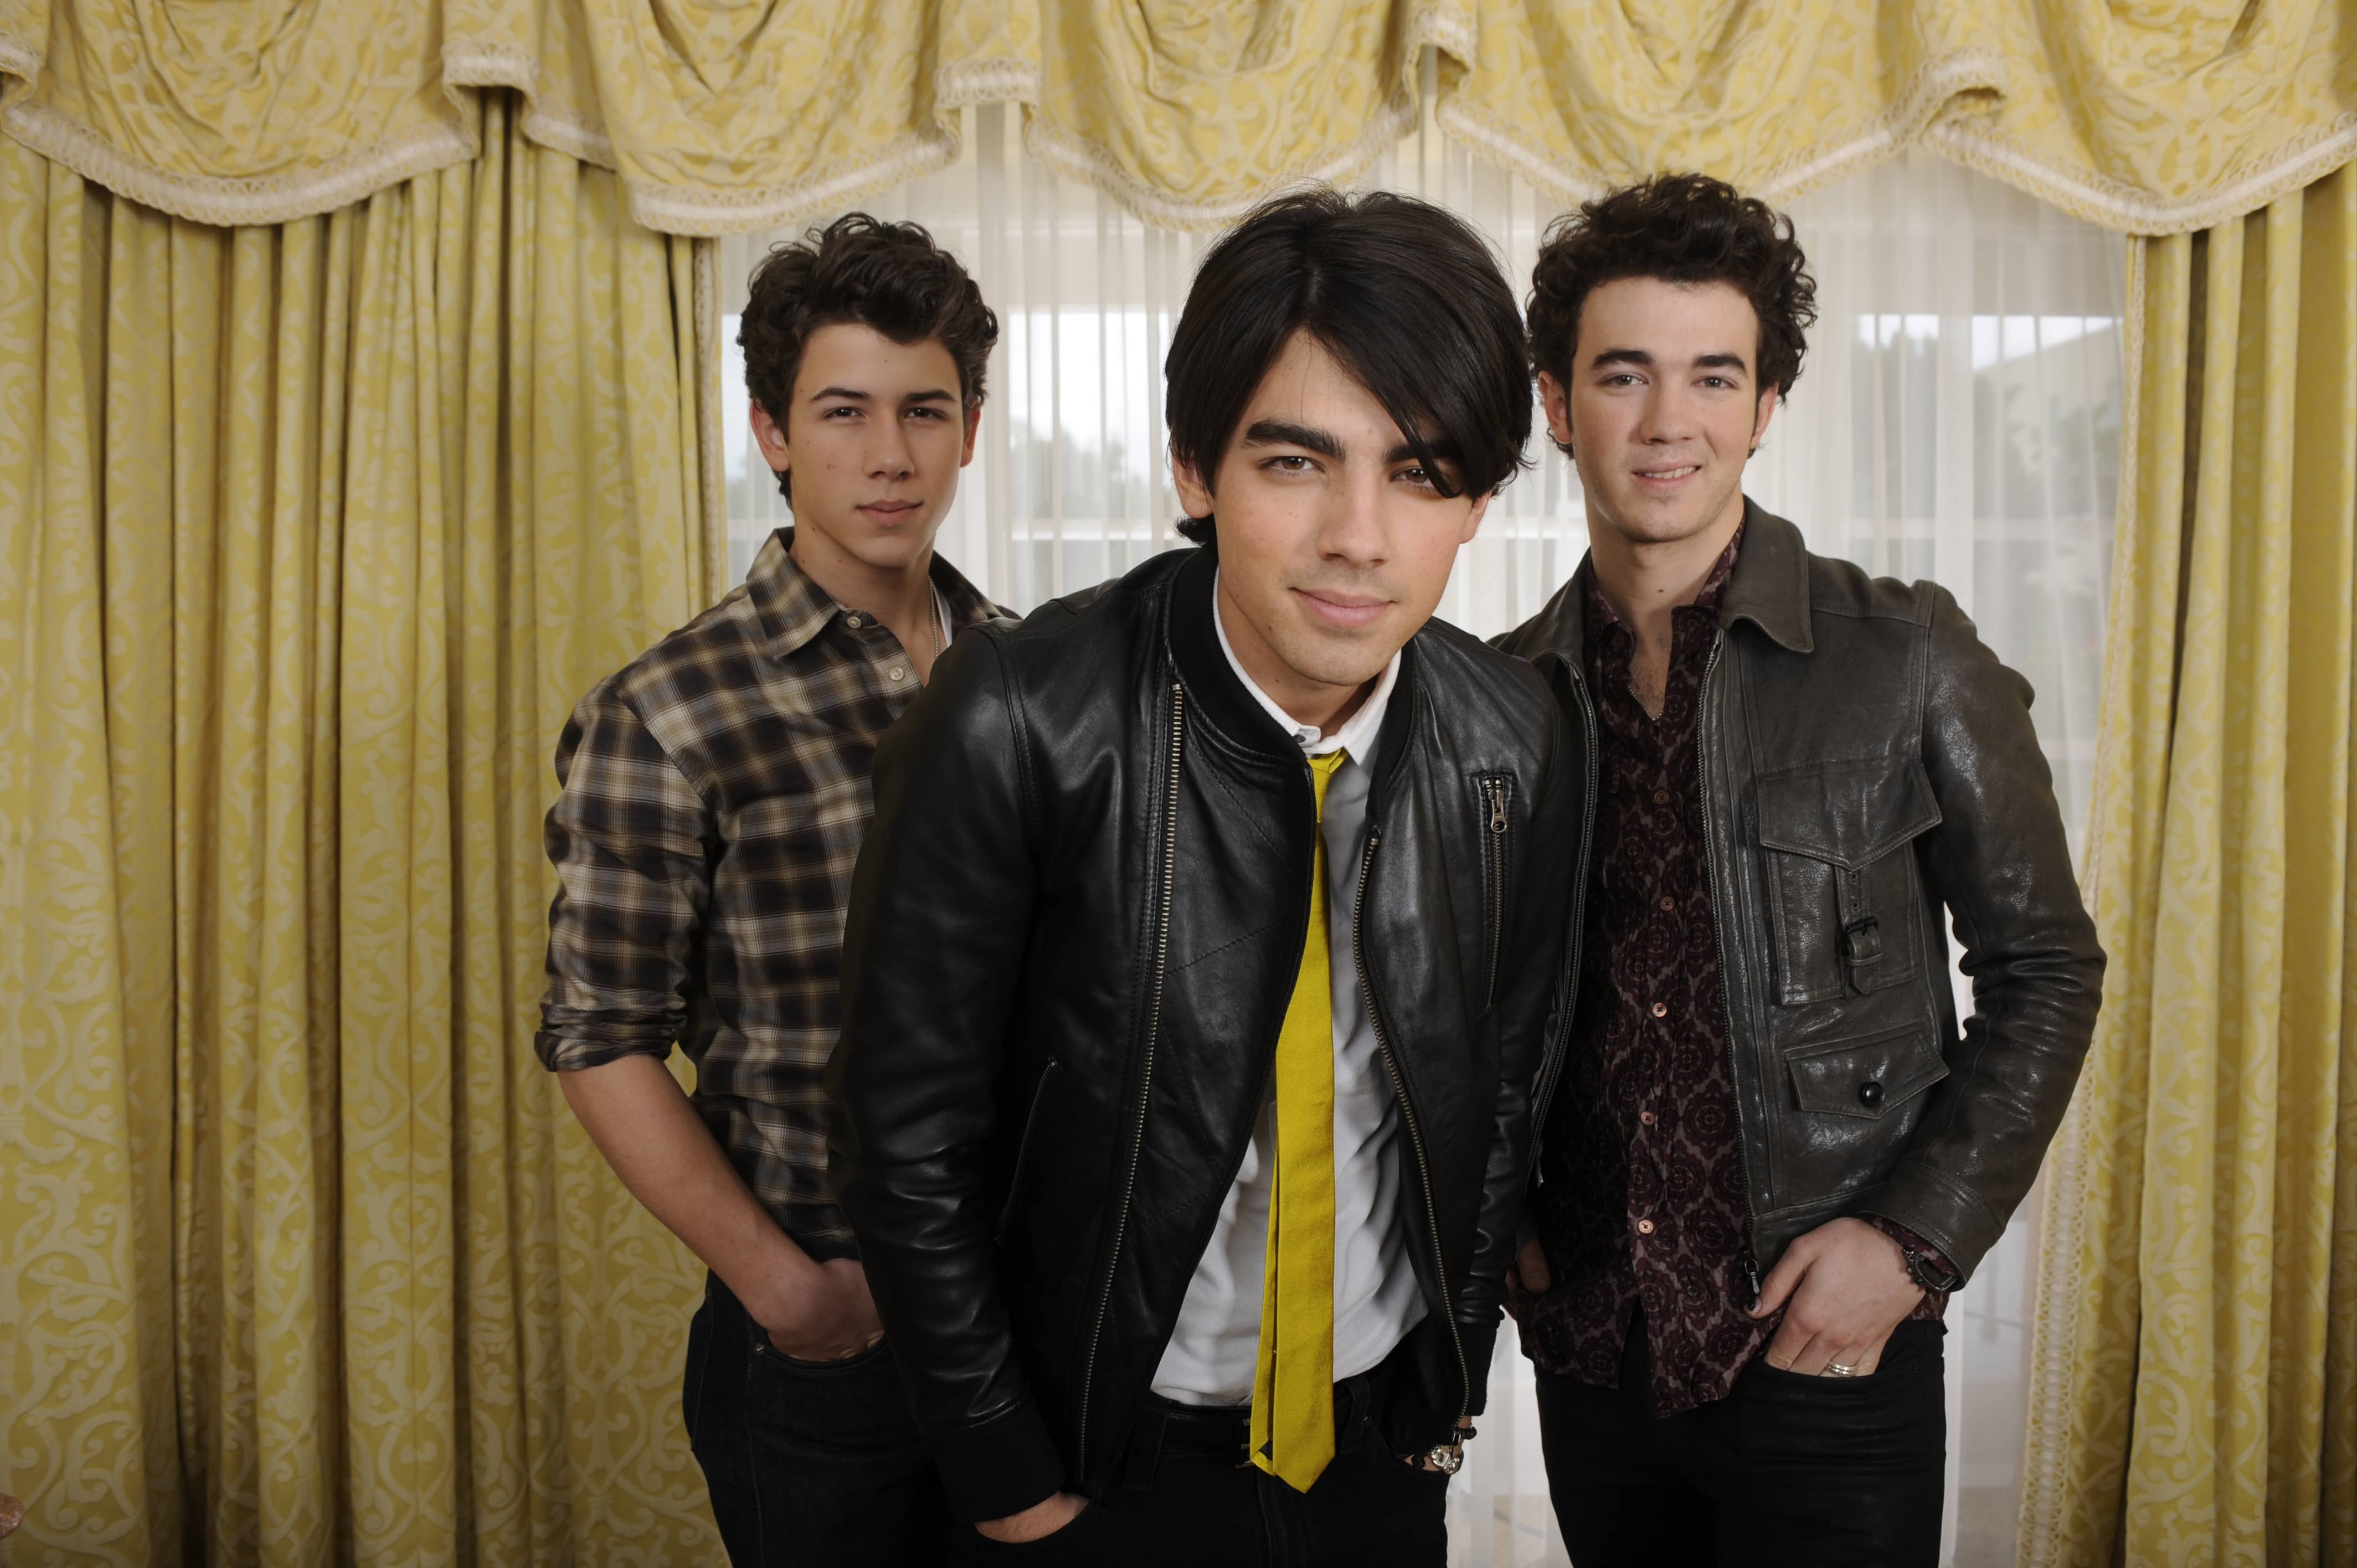 the-jonas-brothers-pose-for-a-portrait-in-beverly-hills